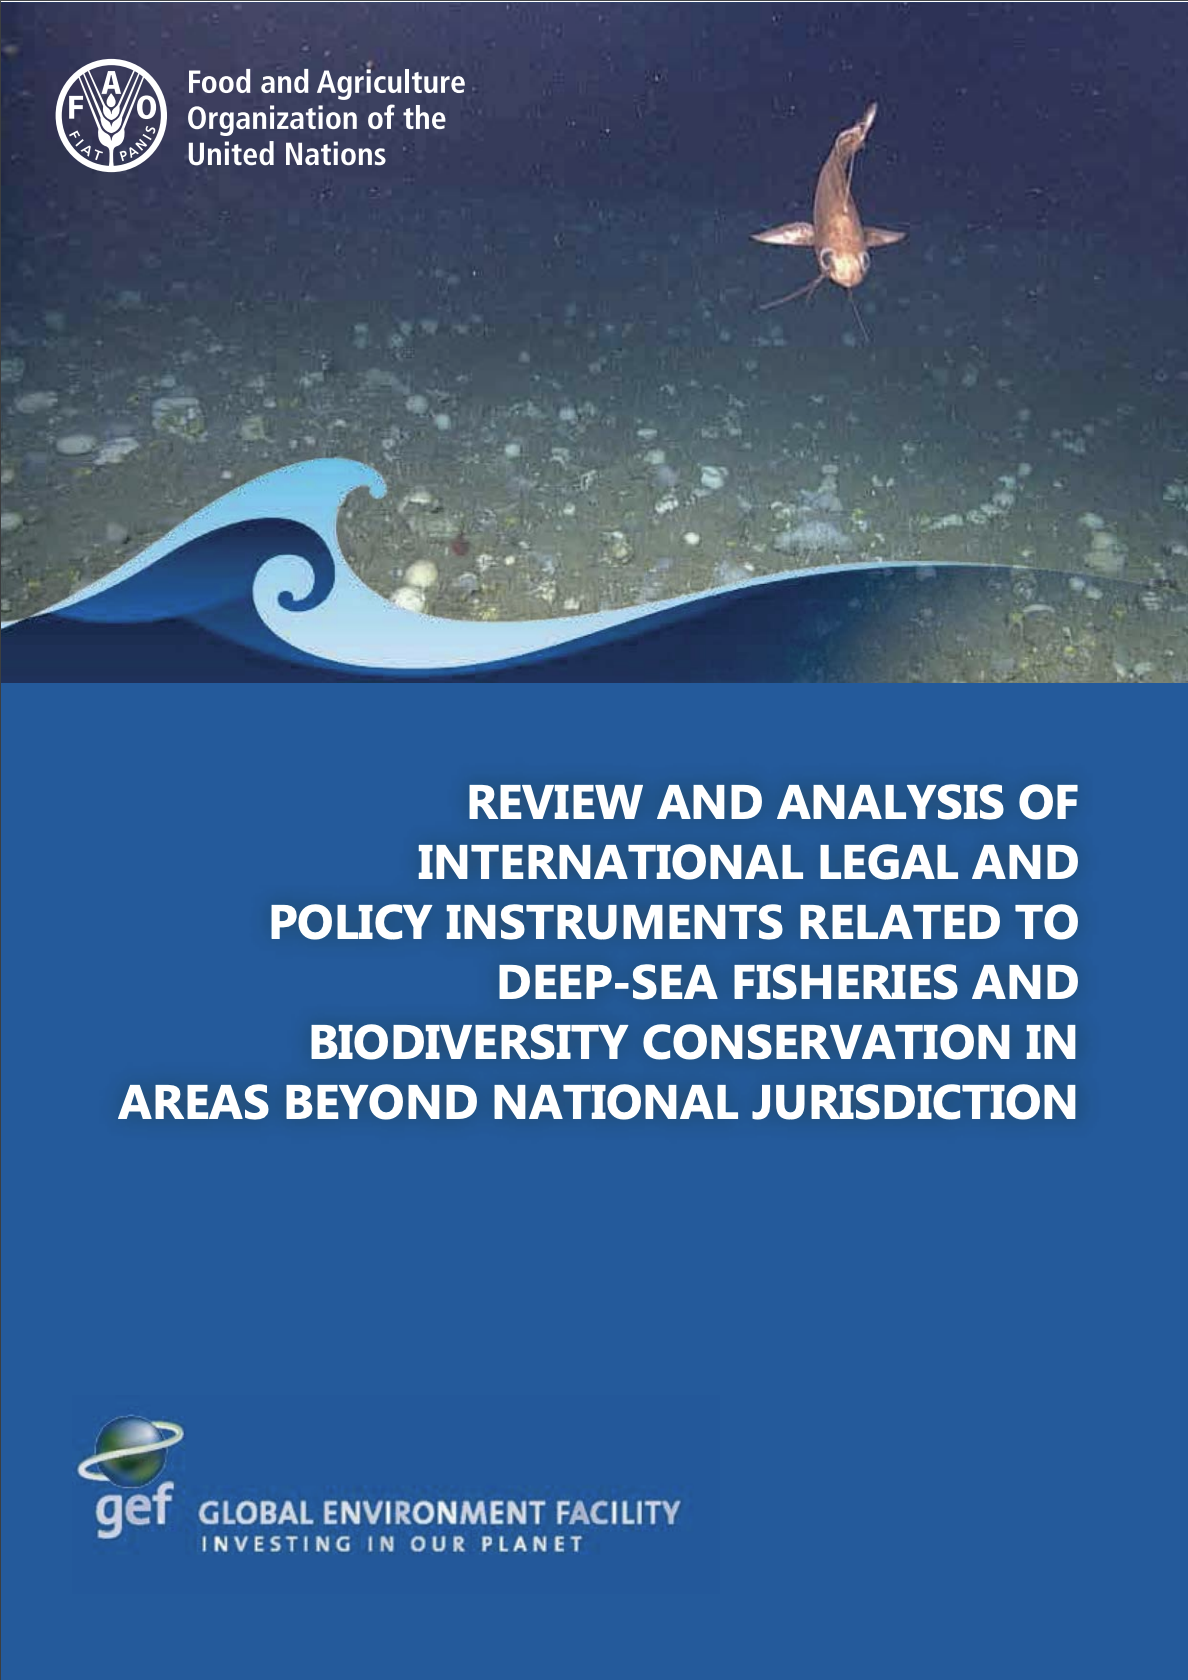 A review and analysis of international legal and policy instruments related to deep-sea fisheries and biodiversity conservation in ABNJ